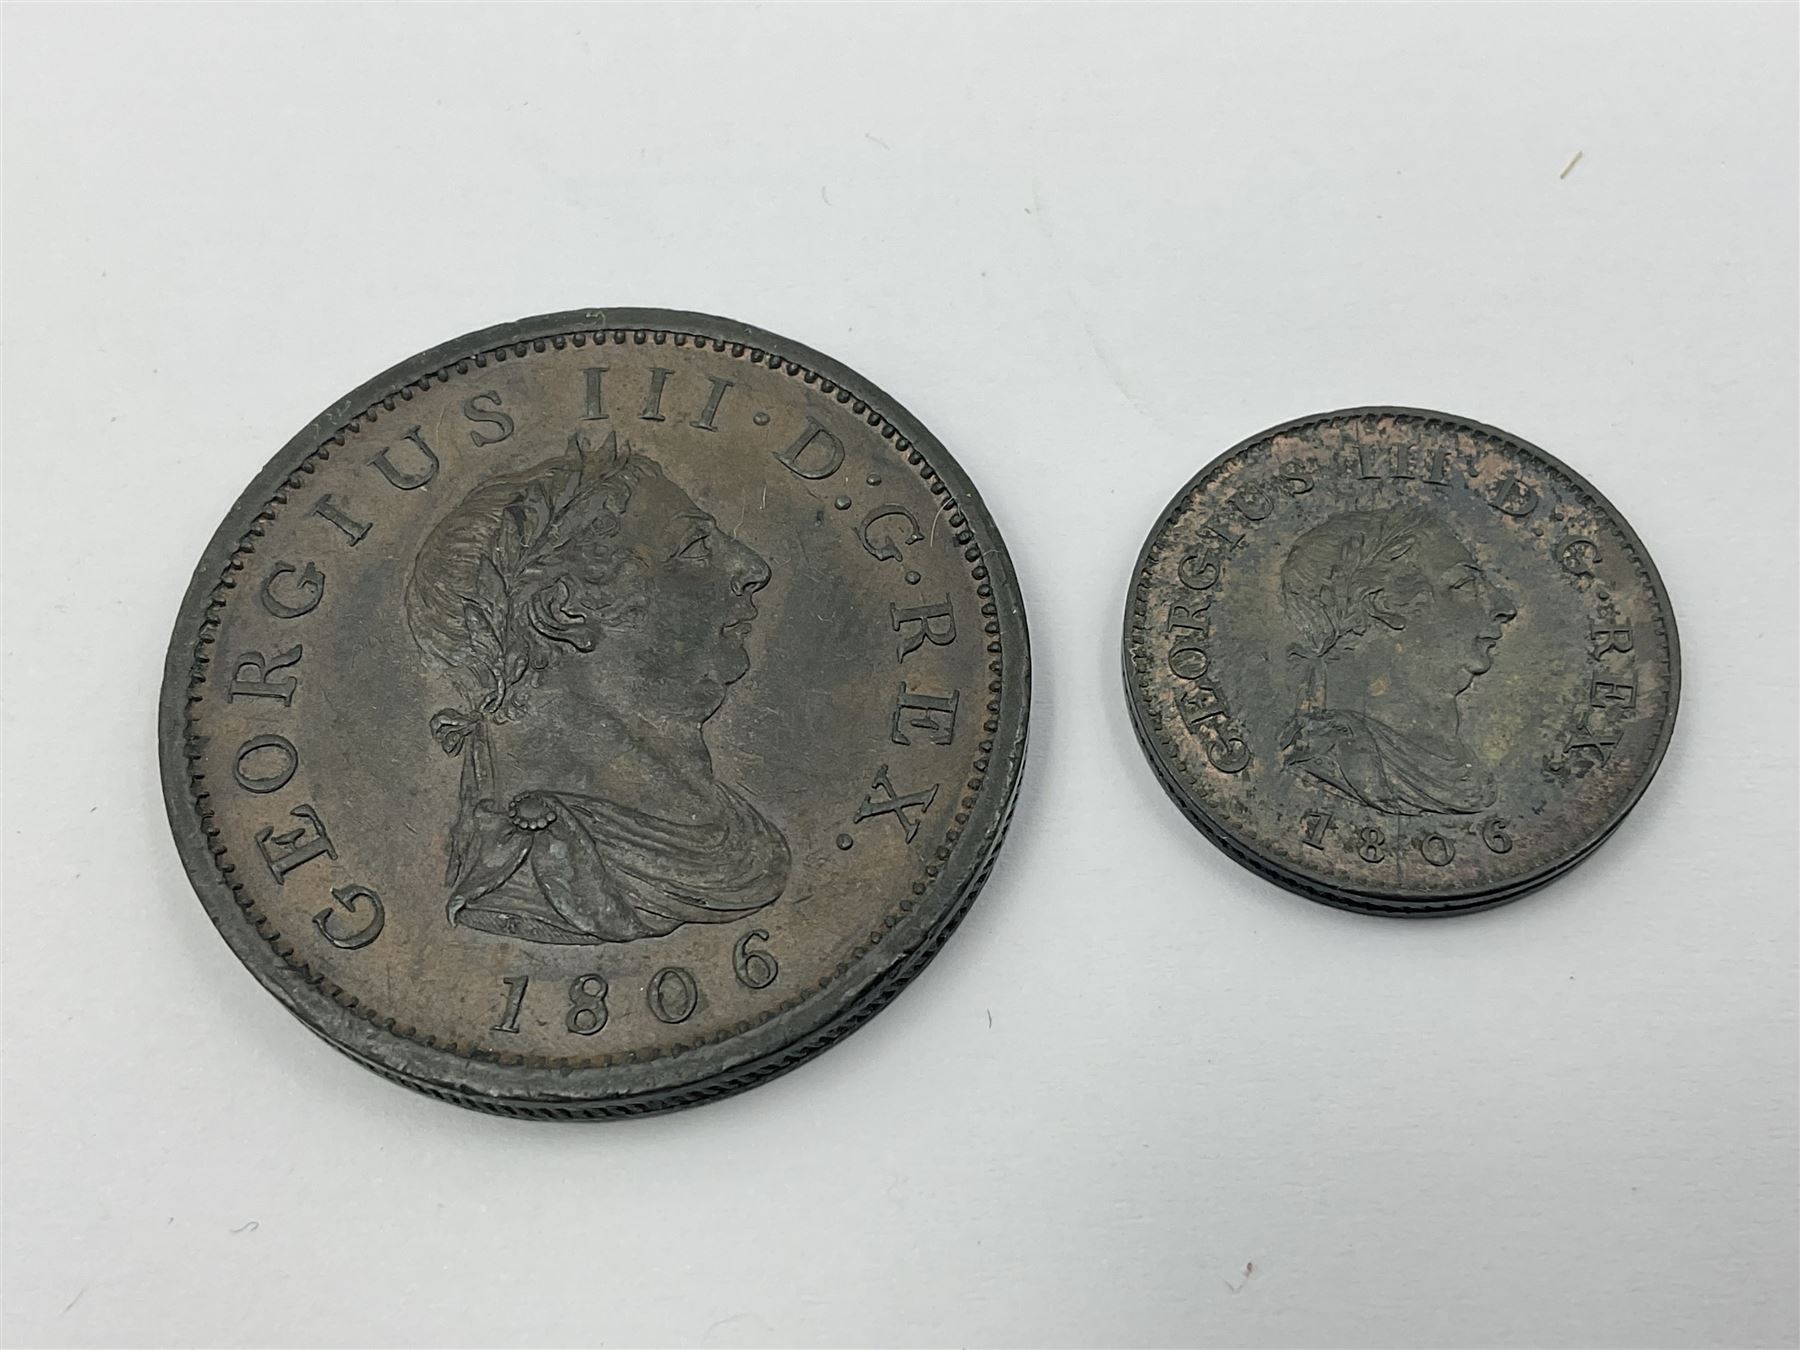 George III 1806 penny and halfpenny coins - Image 2 of 4